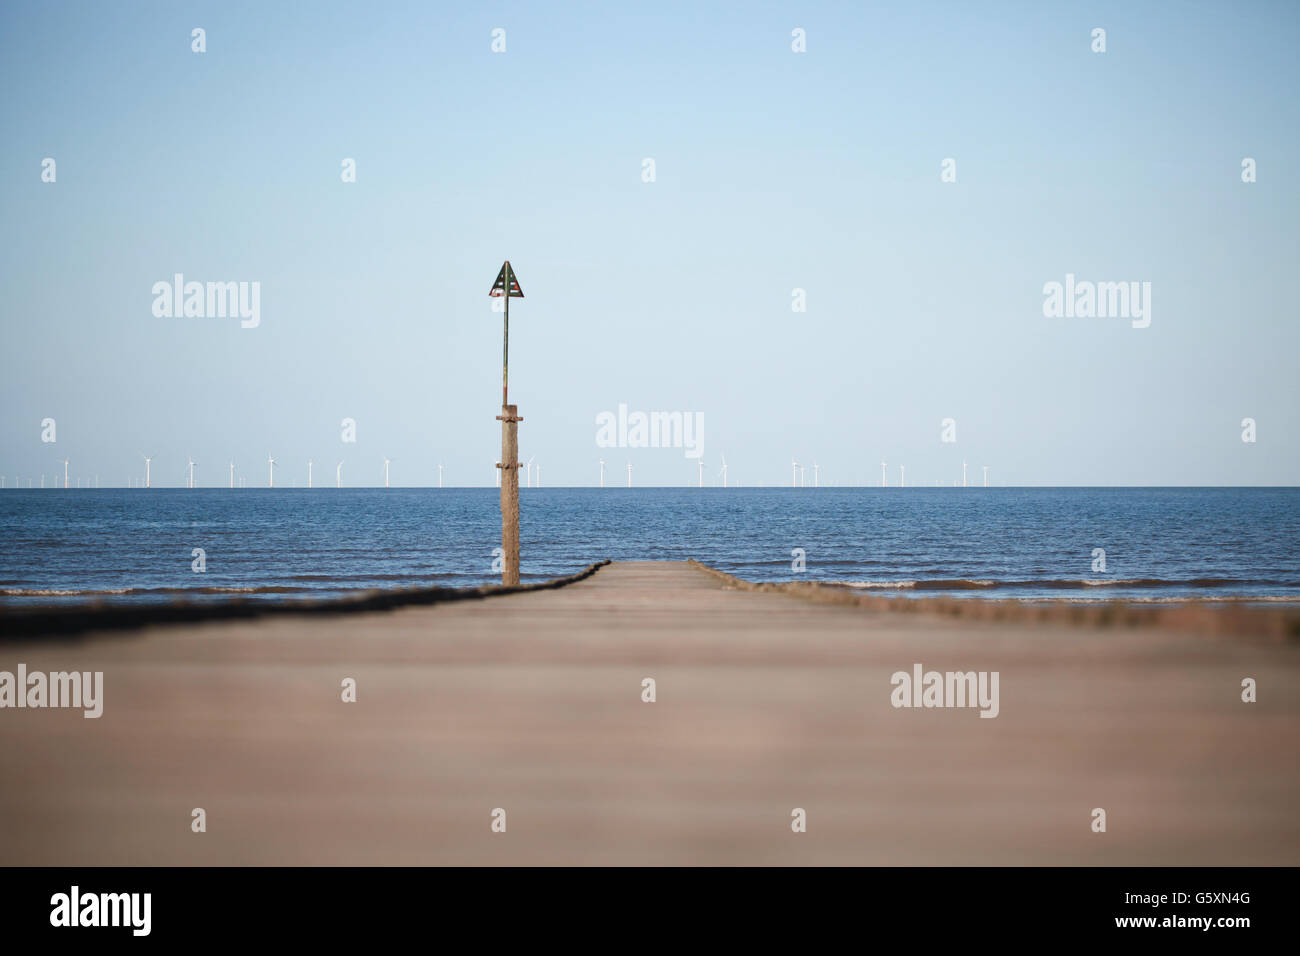 A wooden jetty stretching out into the sea with a wind farm in the distance on the horizon Stock Photo